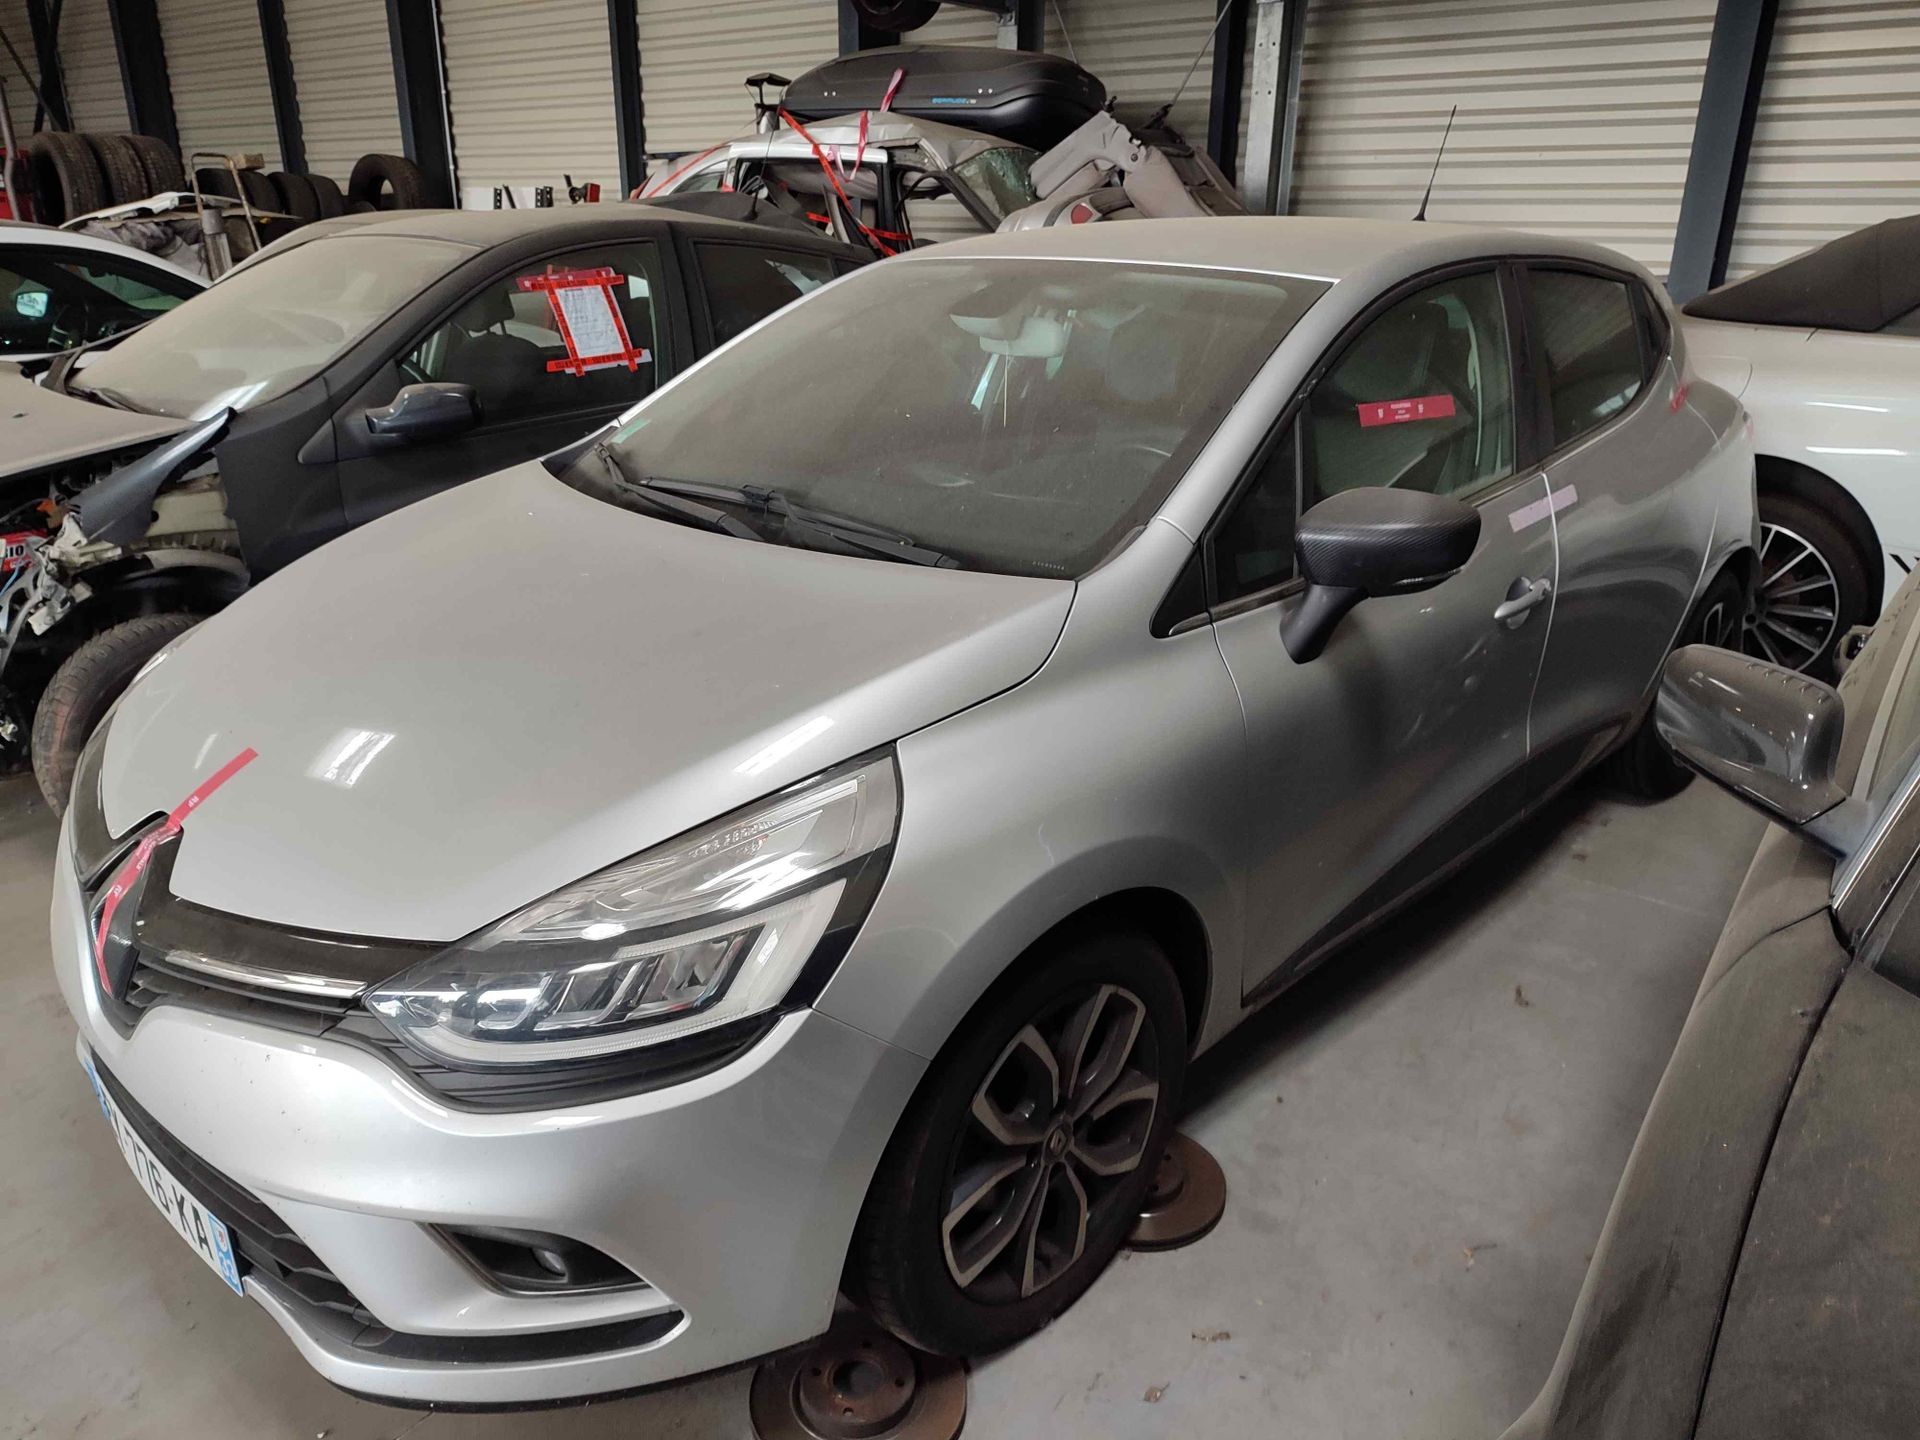 Null [RP][ACI] Reserved for automotive professionals.
RENAULT Clio IV 1.5 Dci 90&hellip;